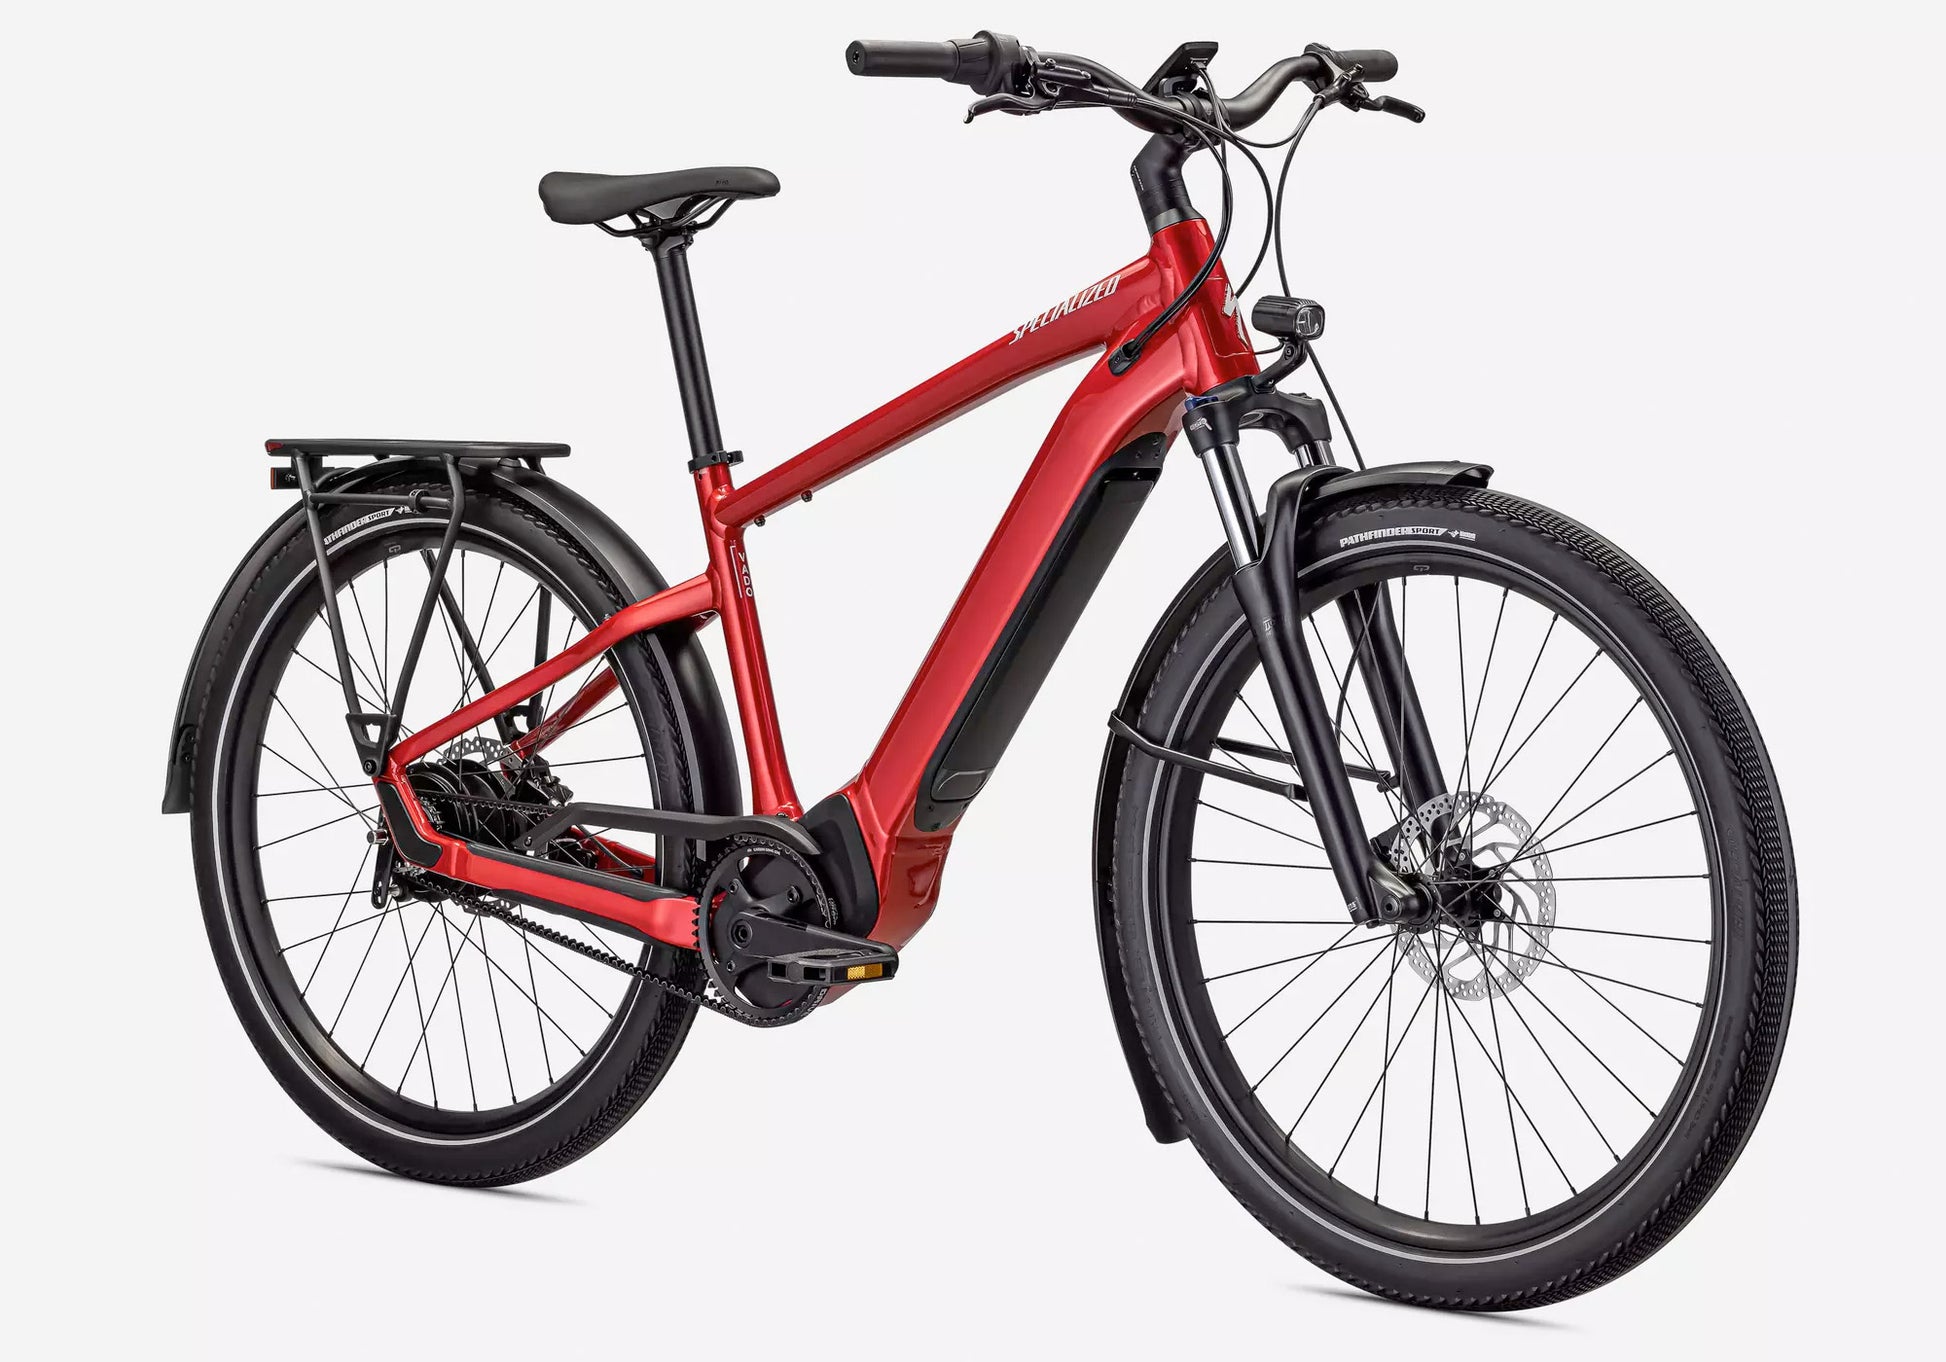 2022 Specialized Turbo Vado 3.0 Internally Geared Electric Bike - Red Tint